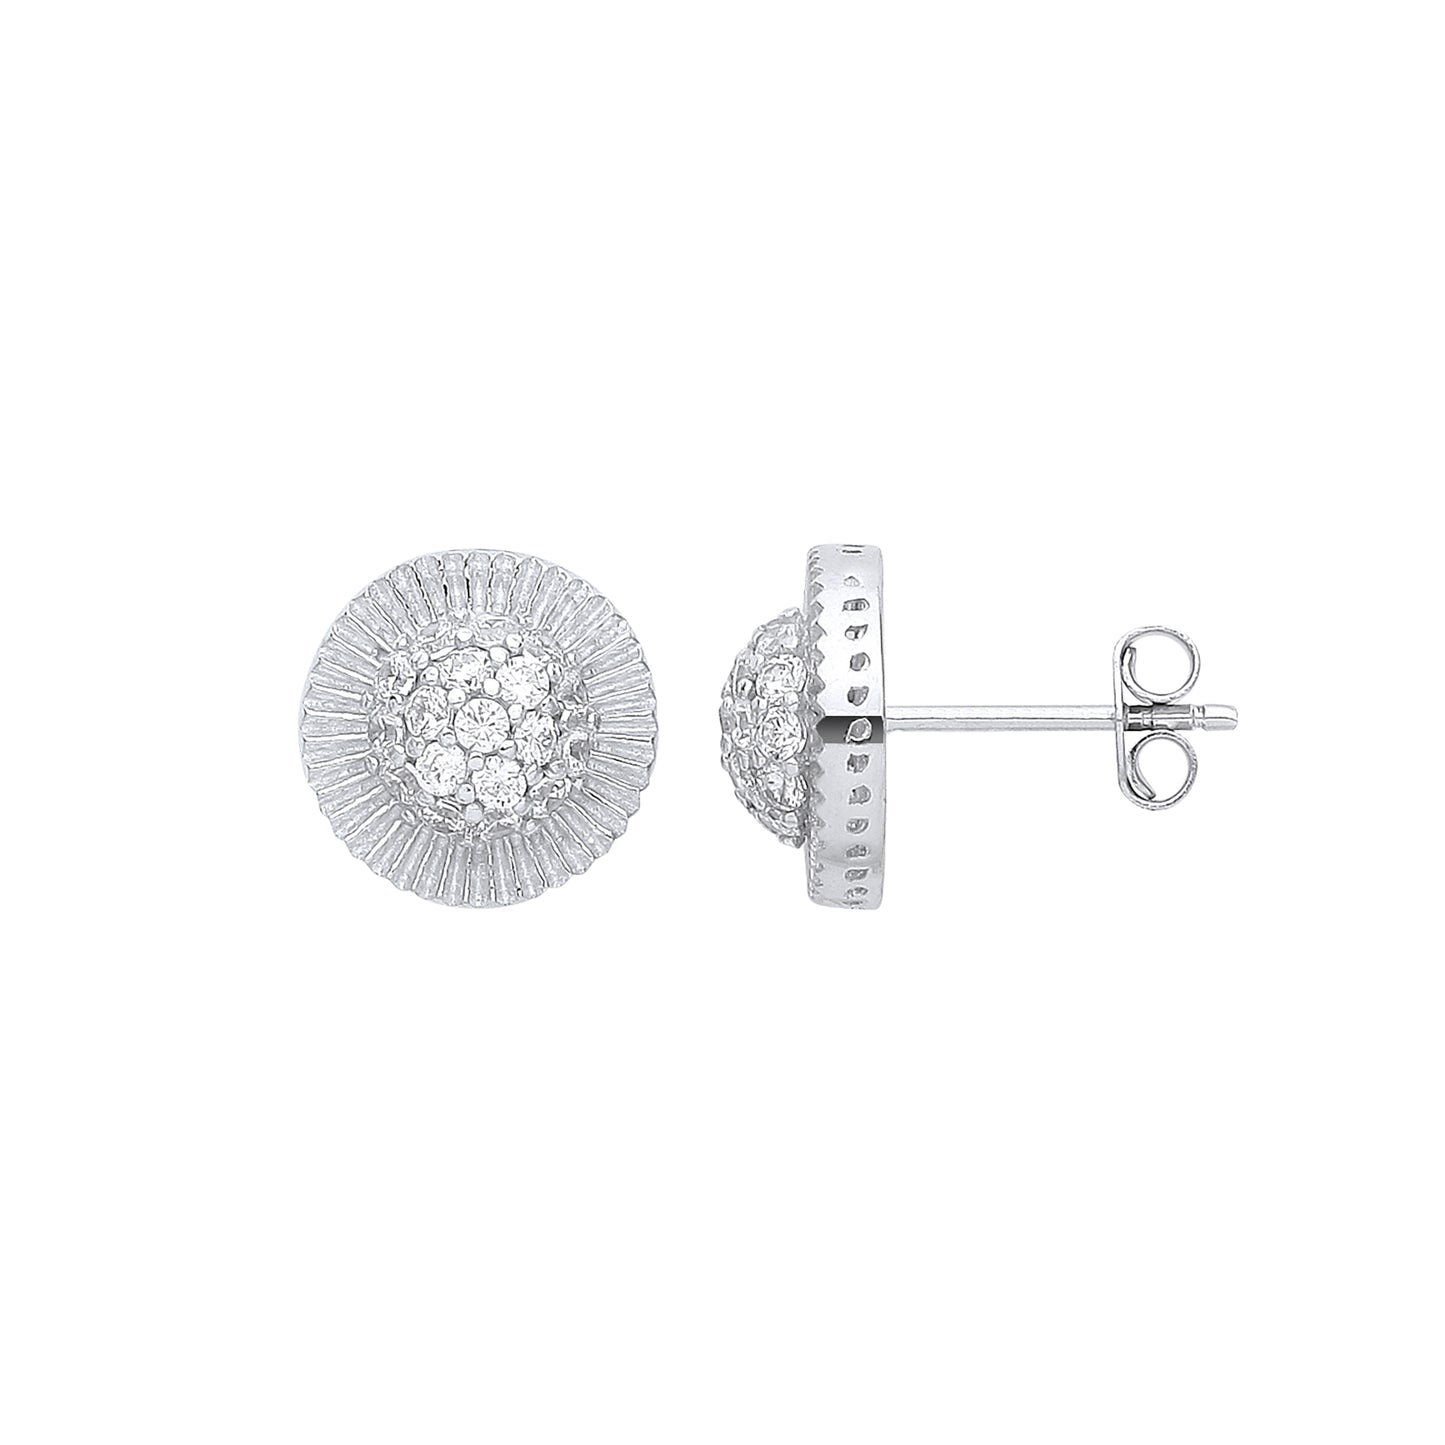 White Gold Cz Round 11mm Stud Earrings